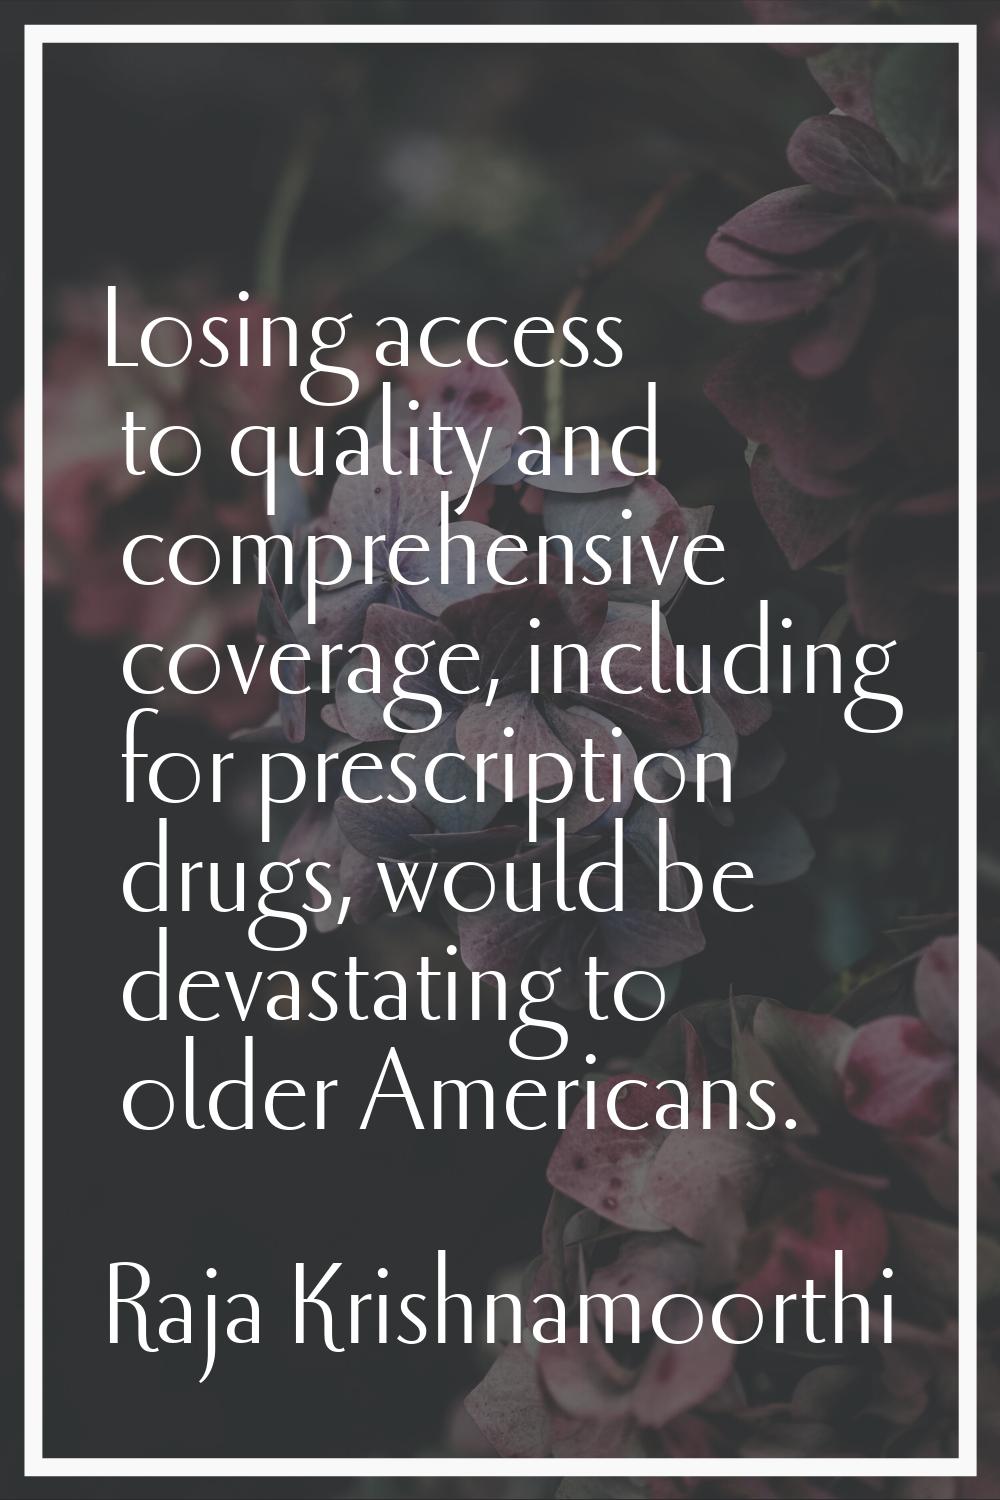 Losing access to quality and comprehensive coverage, including for prescription drugs, would be dev